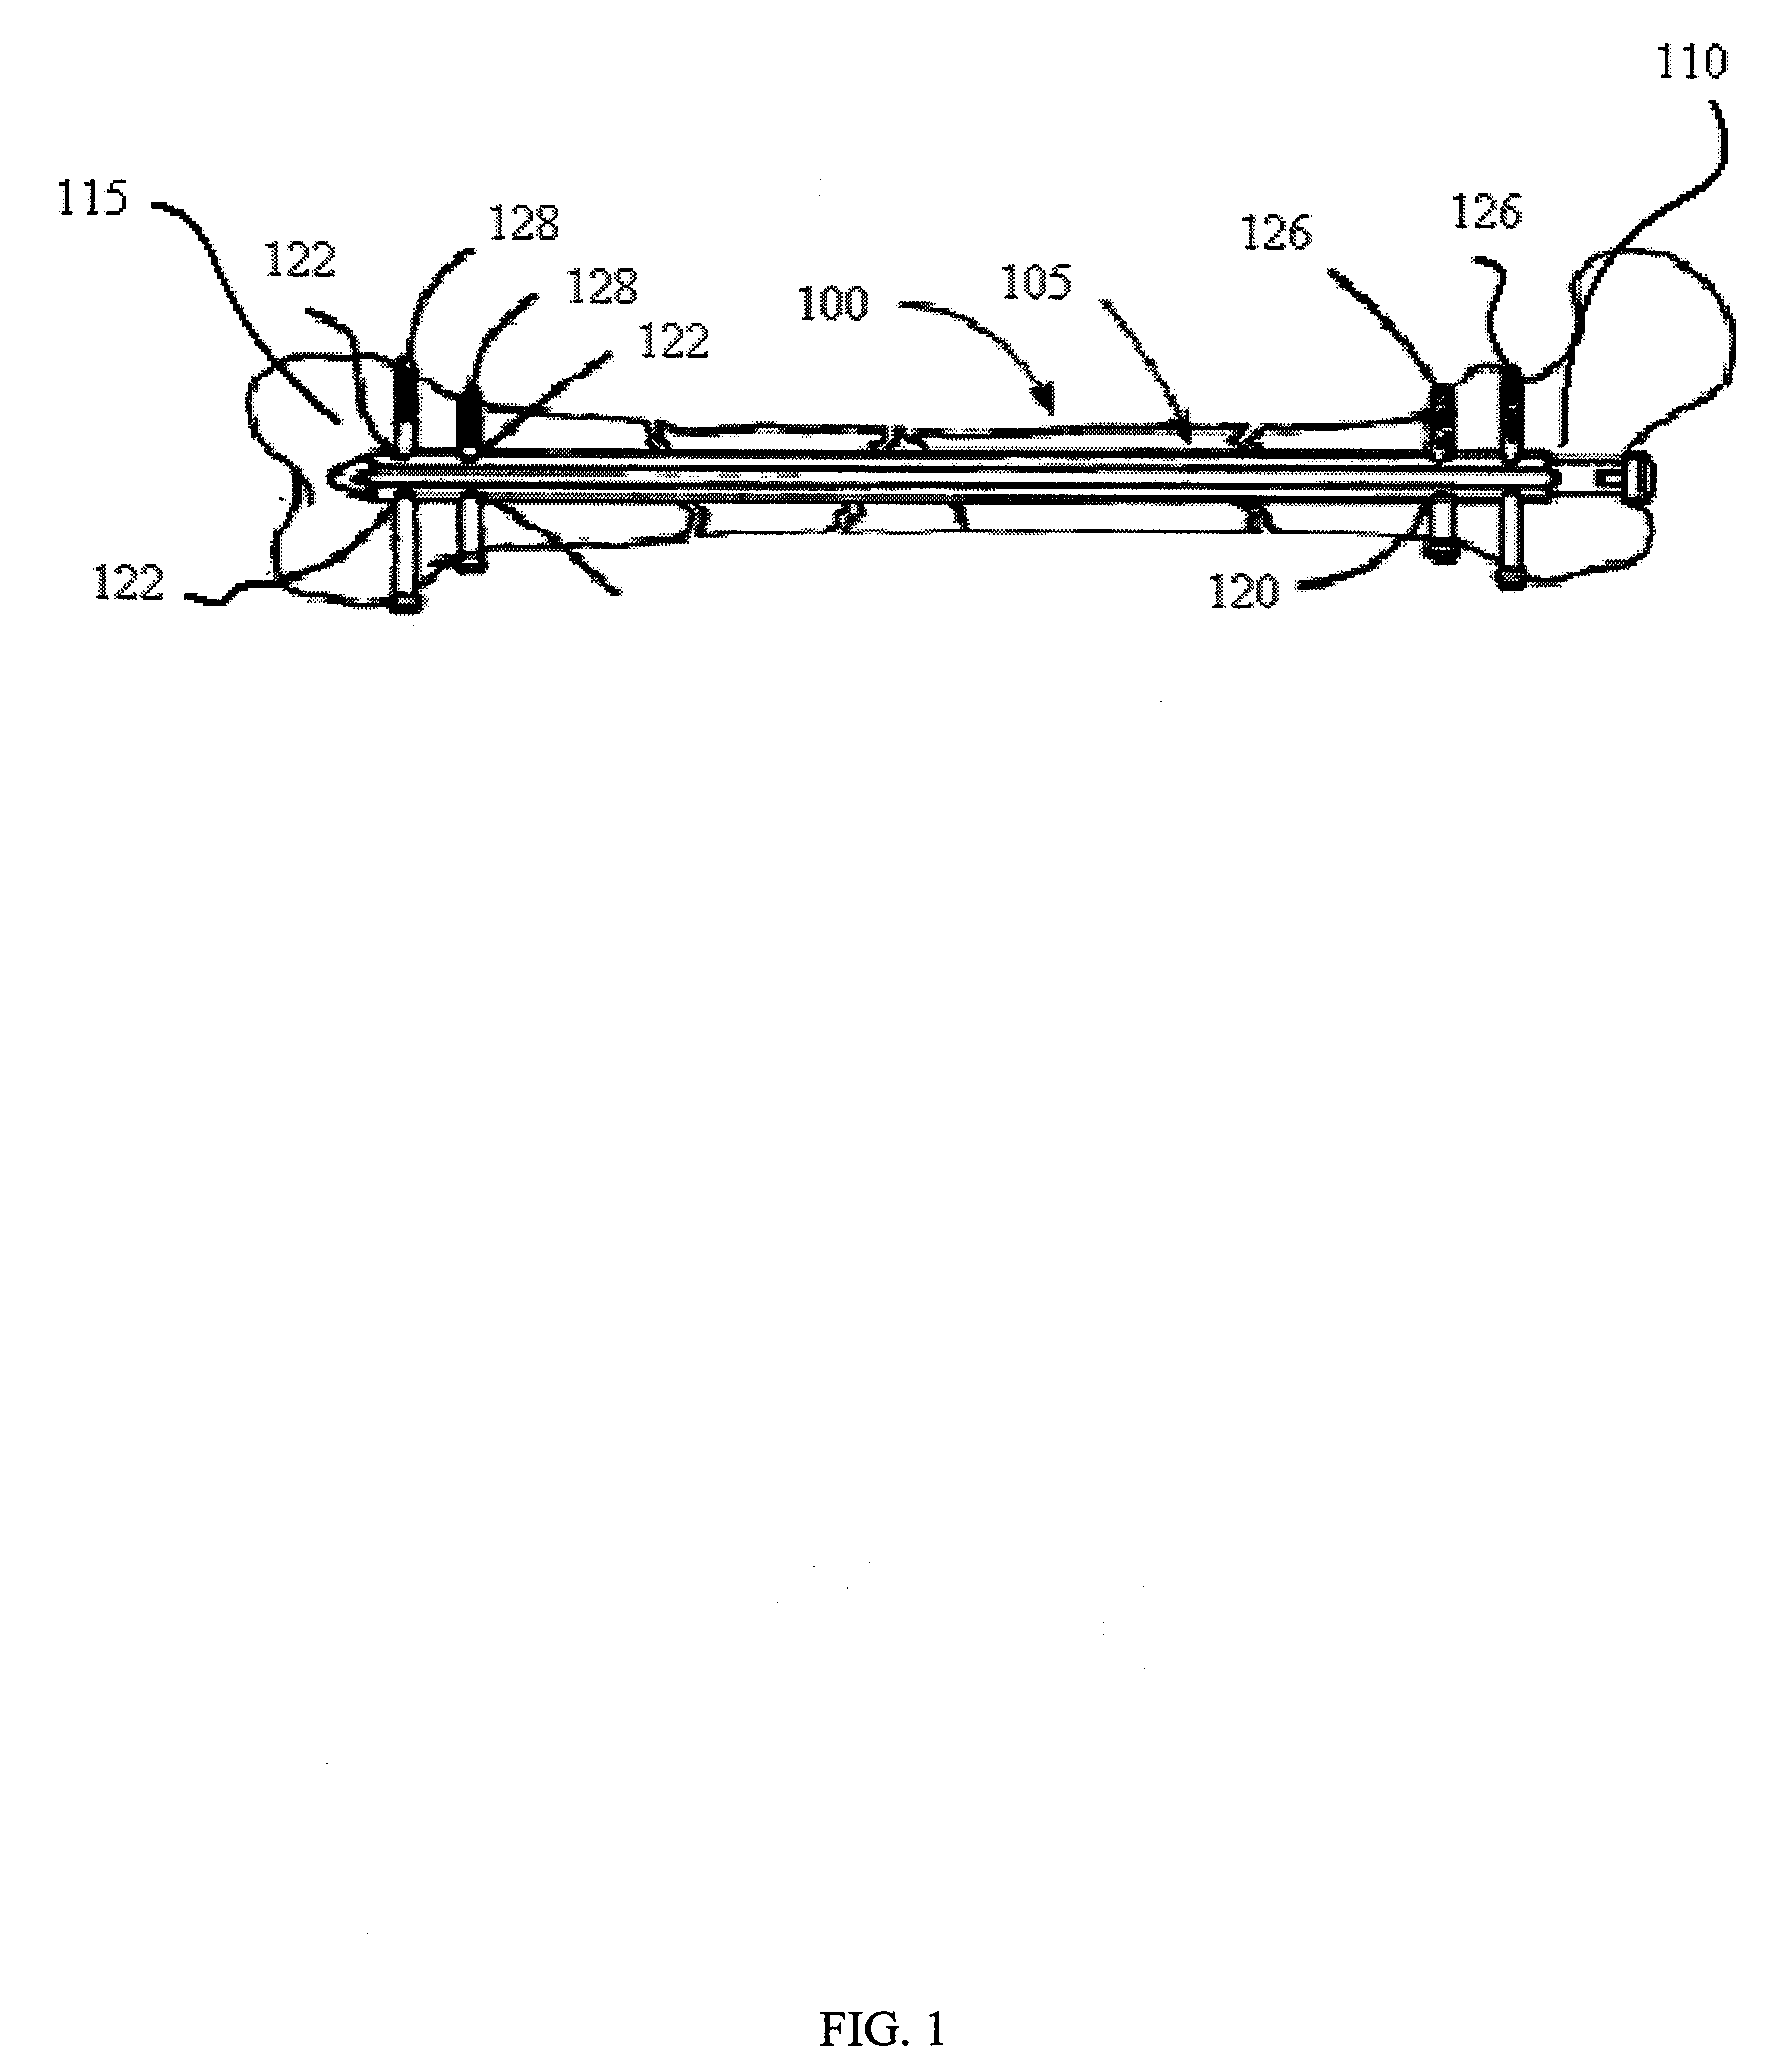 System and method for securing surgical implant